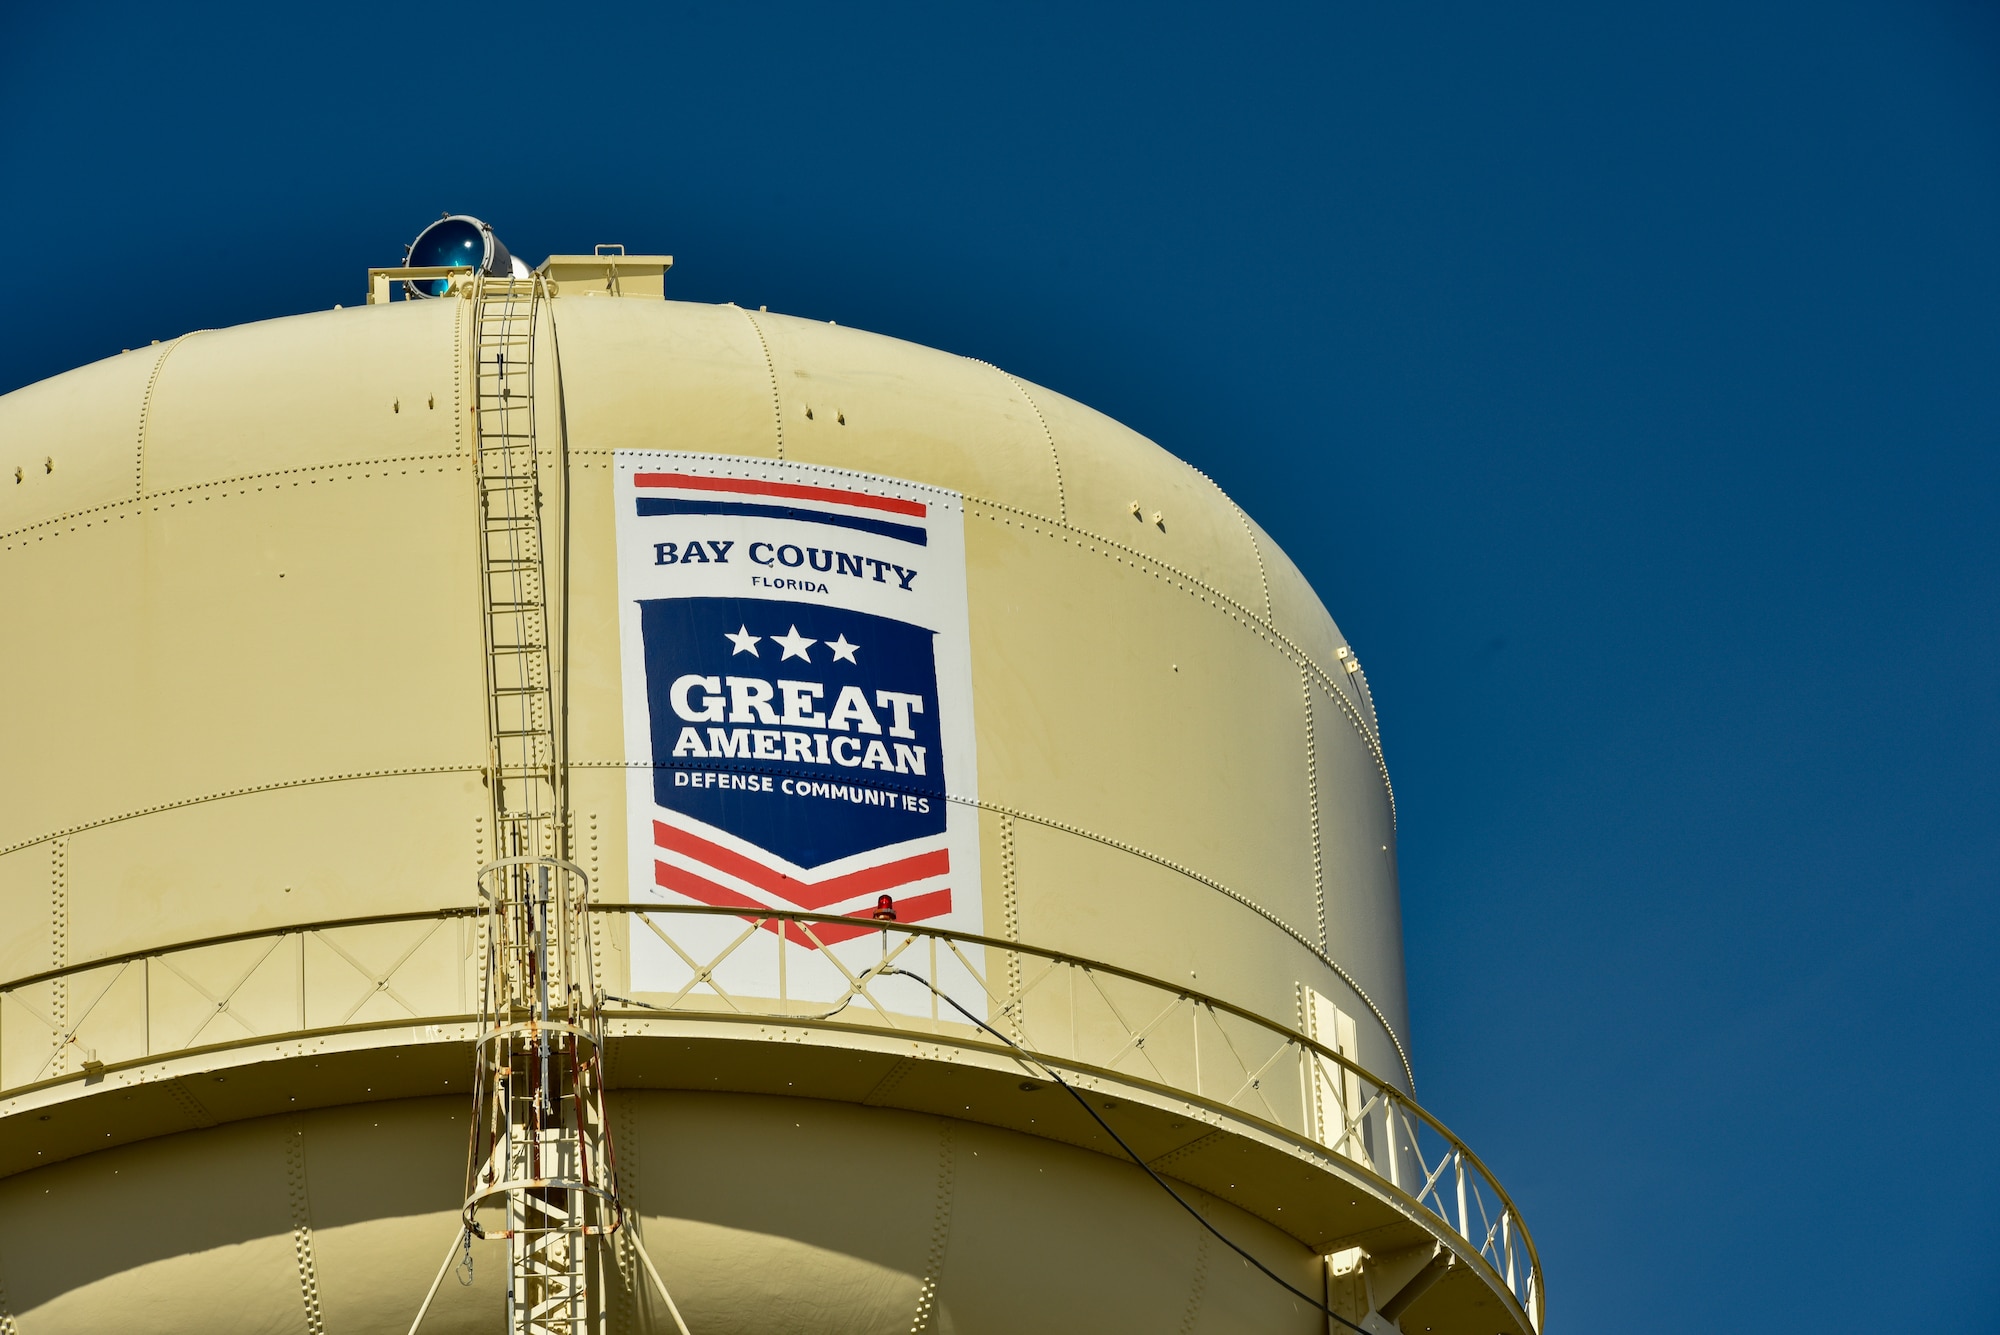 Tyndall Air Force Base’s water tower now wears a logo that signifies being awarded the 2019 Great American Defense Community Award during a ceremony at Tyndall Air Force Base, Fla., Feb. 13, 2019. The GADC program leaders work to recognize military communities and regions that help improve the quality of life for veterans, service members and their families. (U.S. Air Force photo by Staff Sgt. Alexandre Montes)